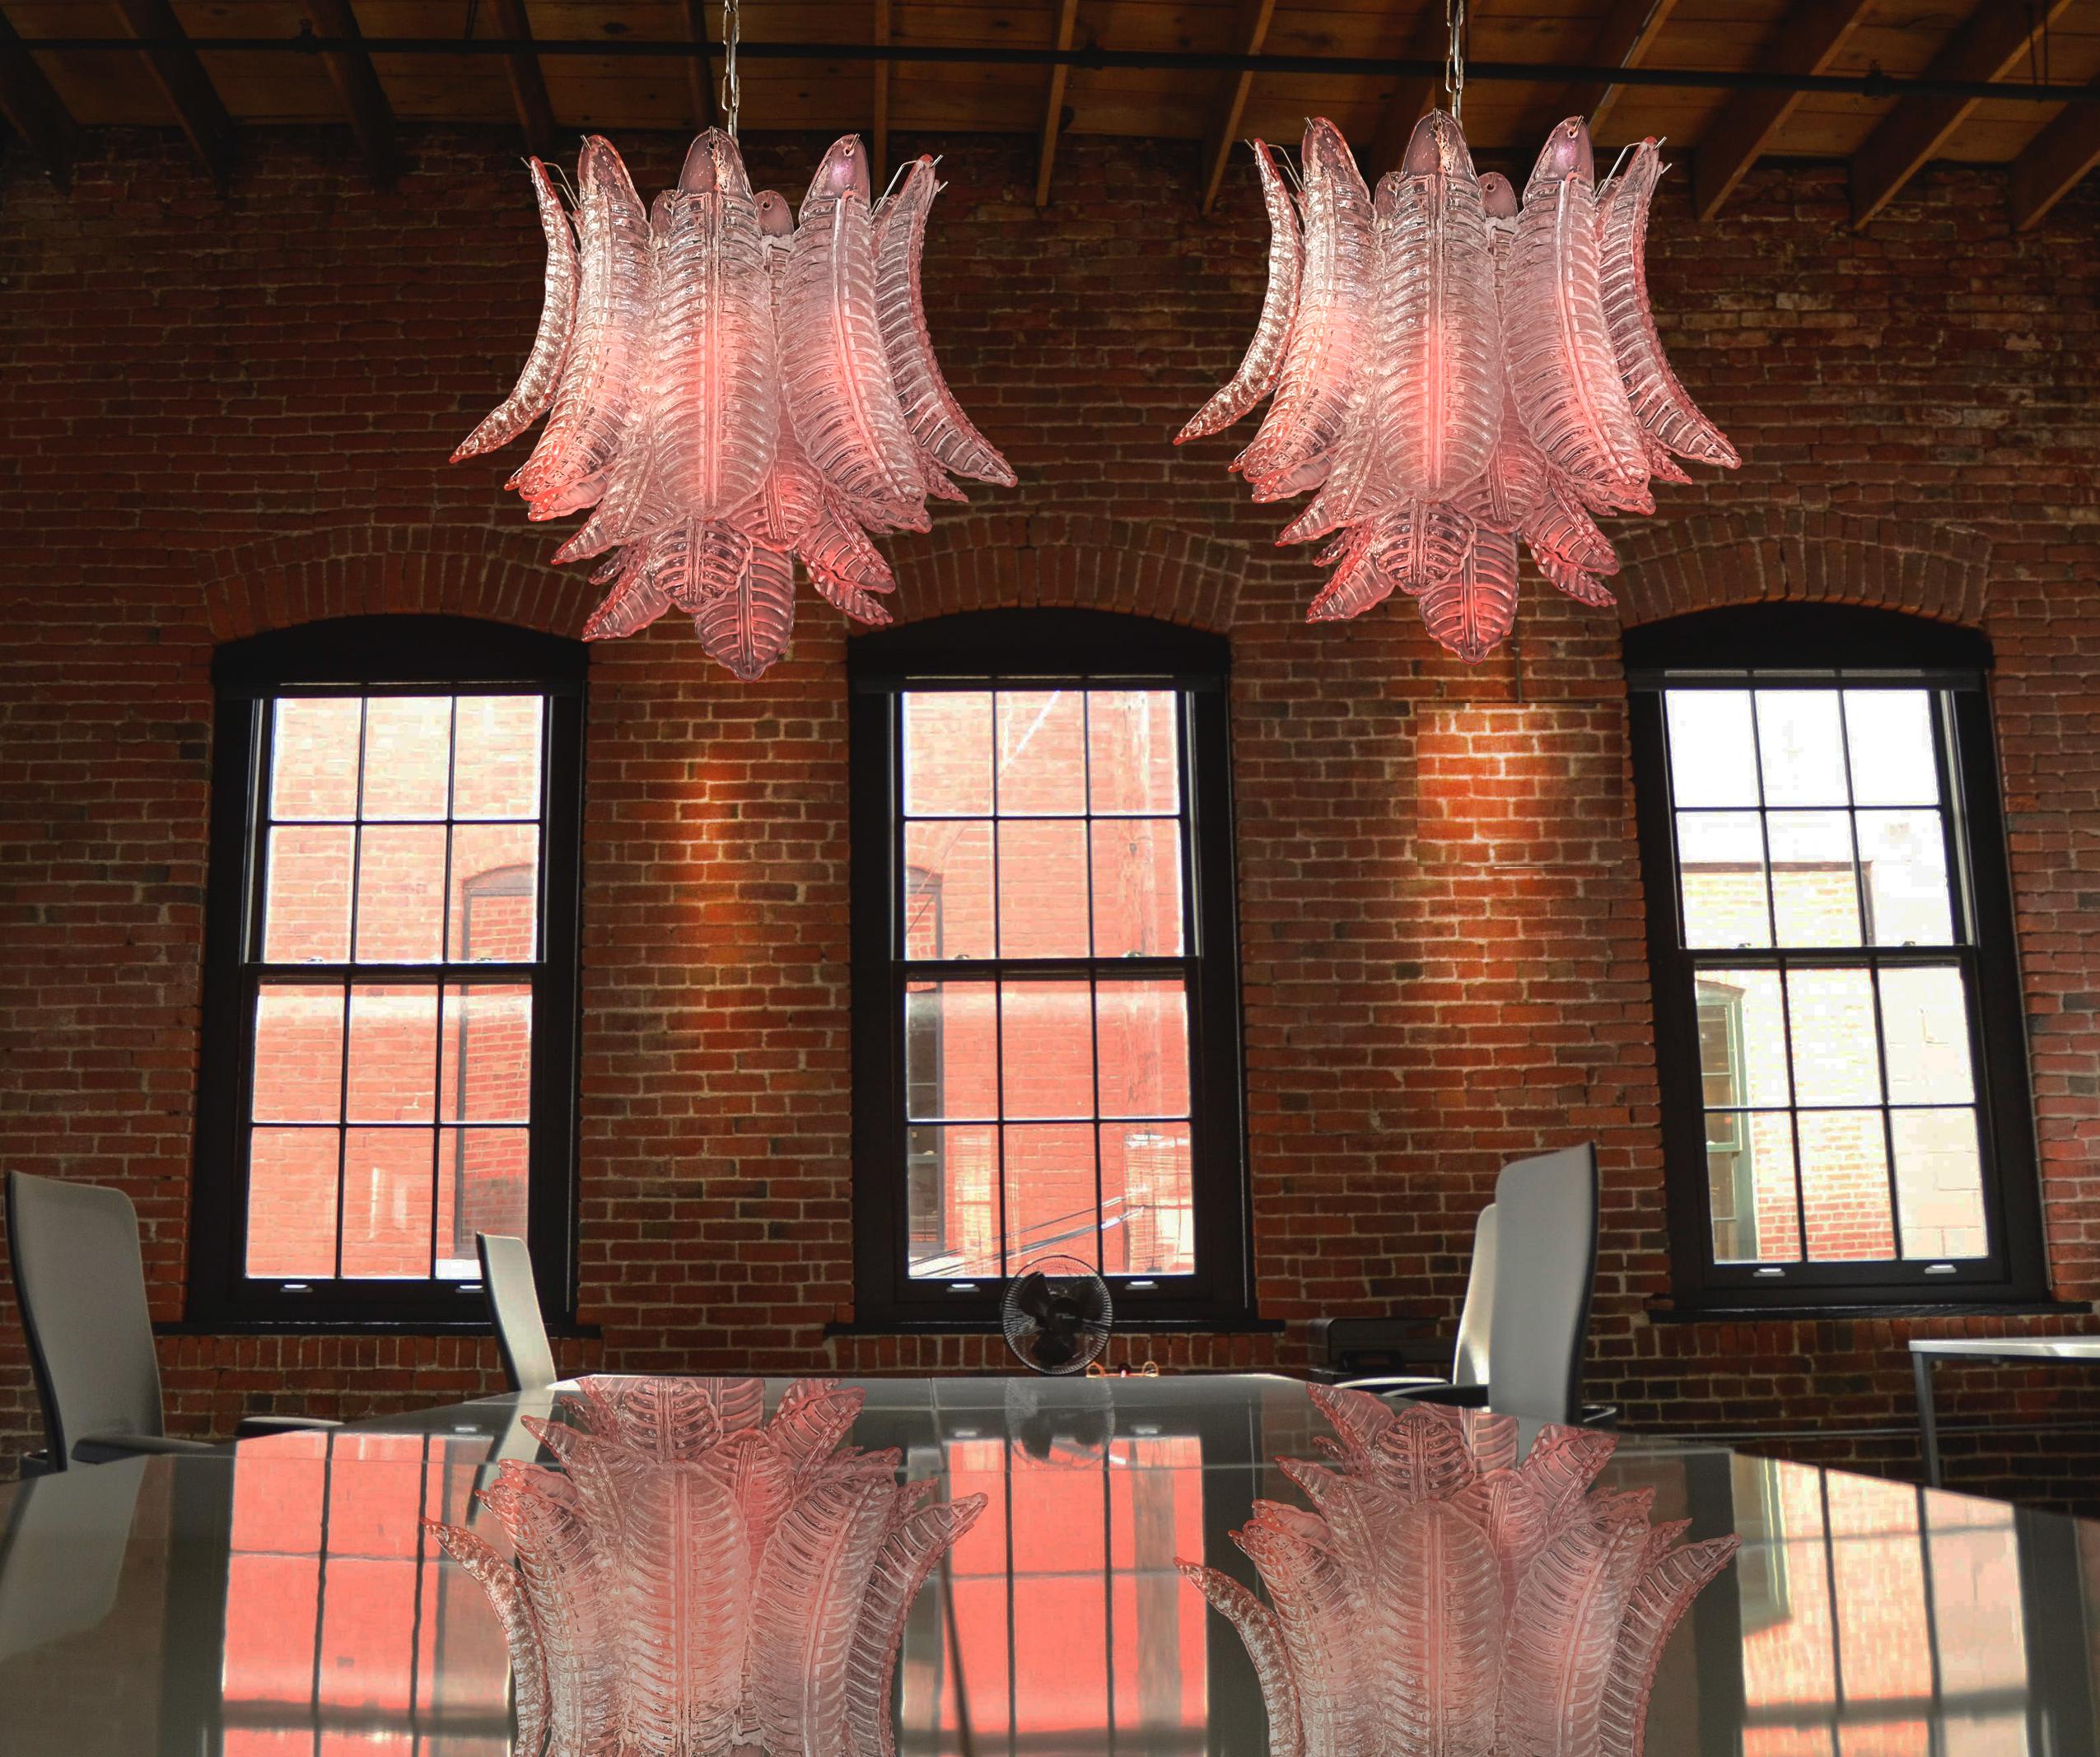 Pair of Italian Murano glass chandeliers
Beautiful Italian Murano chandelier composed of 36 splendid pink glasses that give a very elegant look. The glasses of this chandelier are real works of art.
Period: 1980s
Dimensions: 47.25 inches (120 cm)